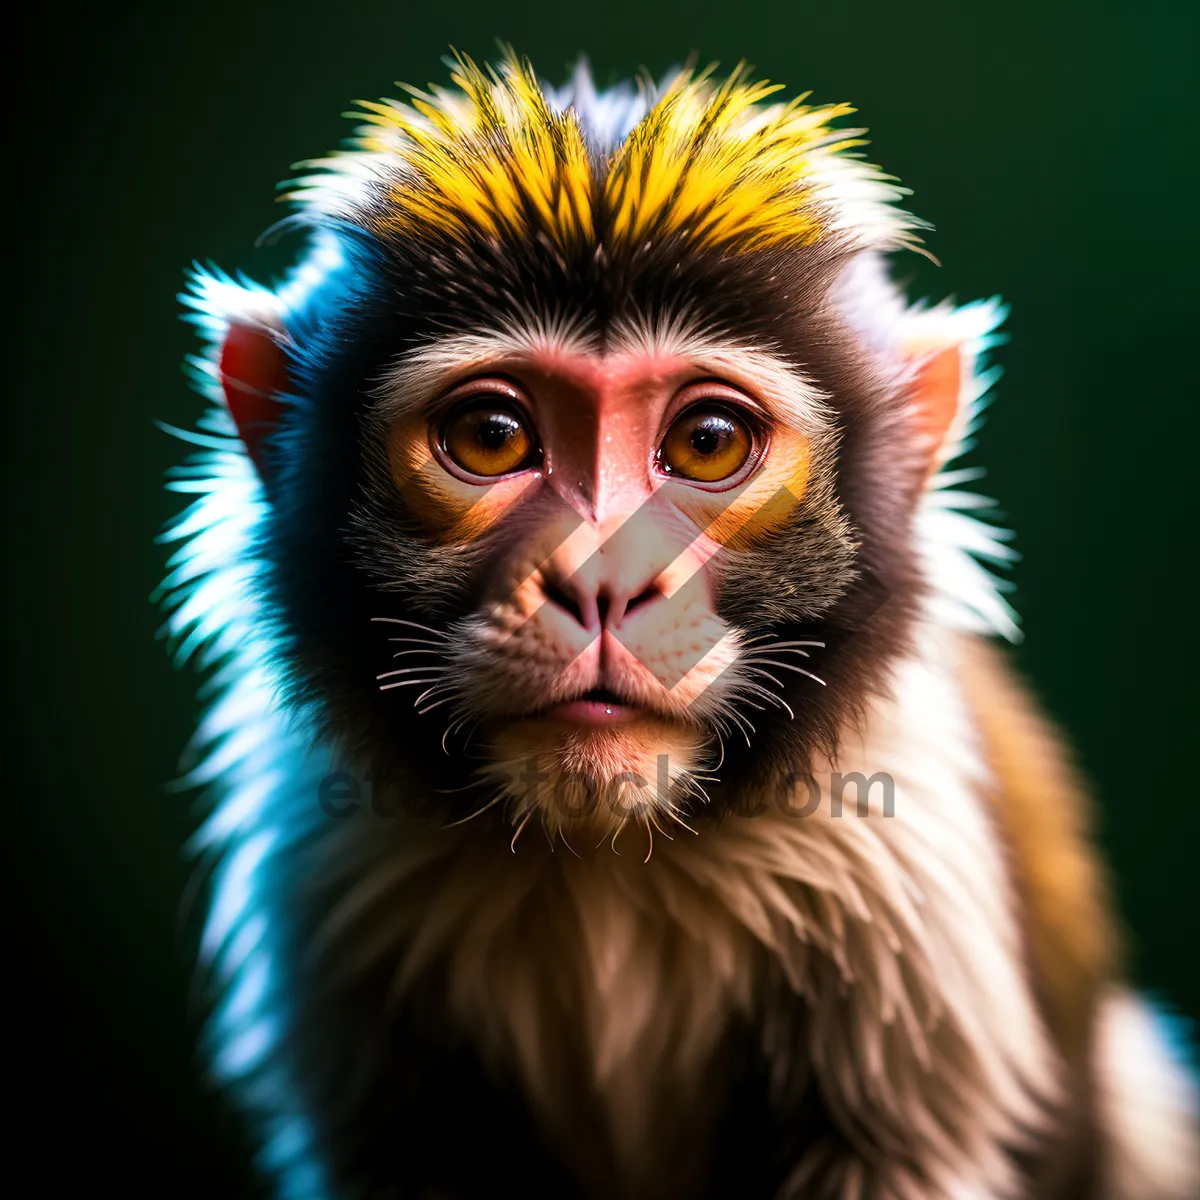 Picture of Cute Baby Macaque Primate with Playful Eyes